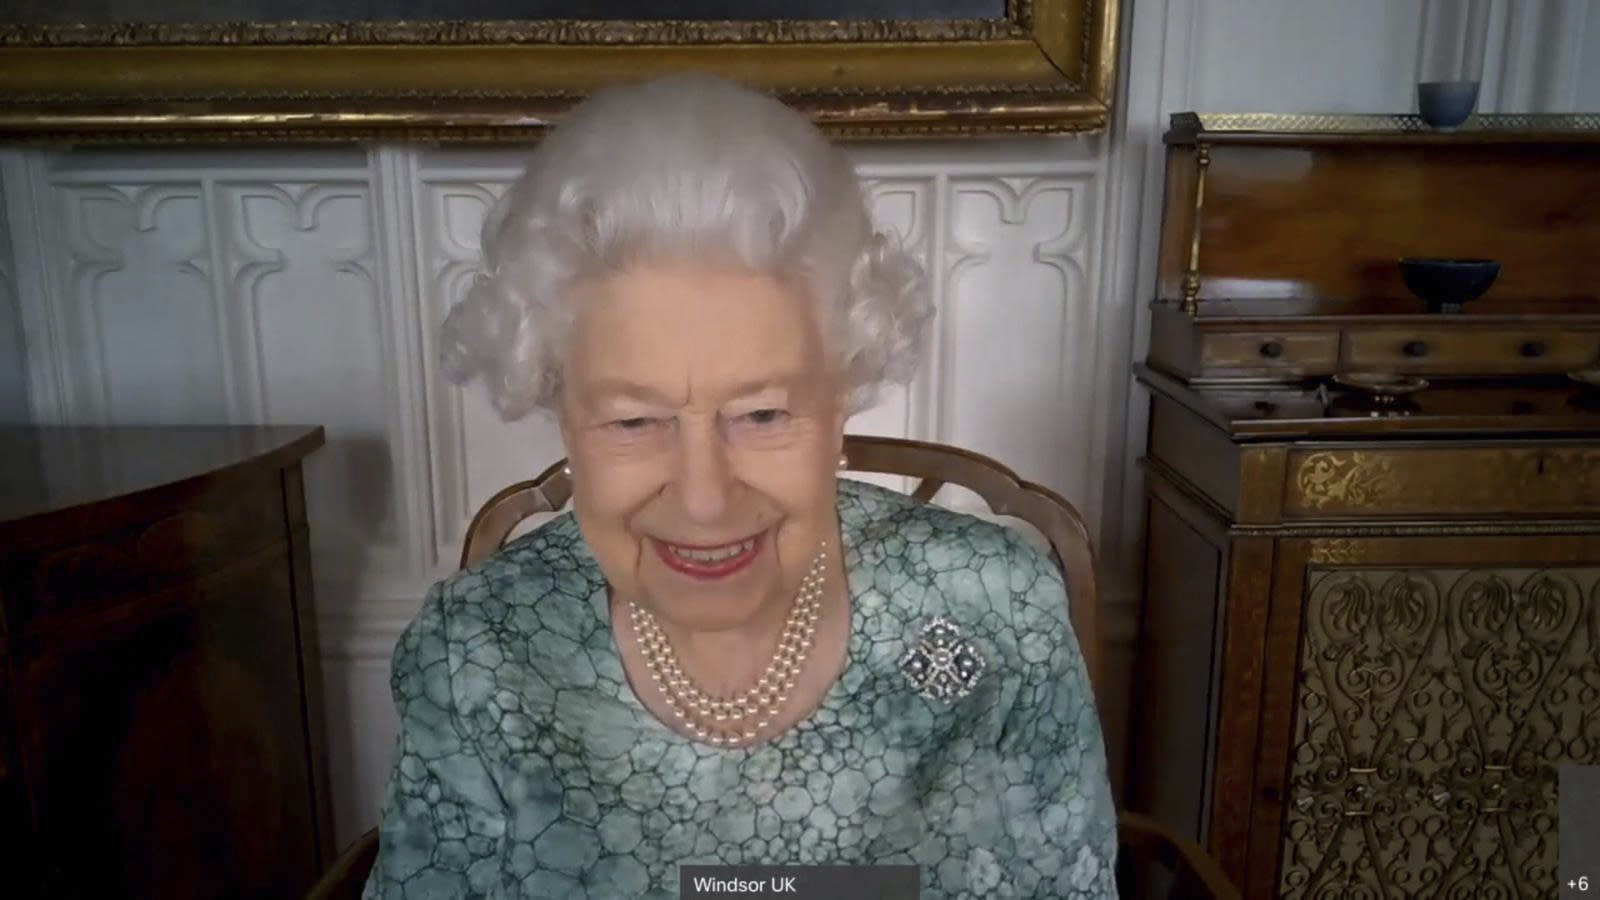 The Queen asks children who are studying space to meet a Soviet astronaut